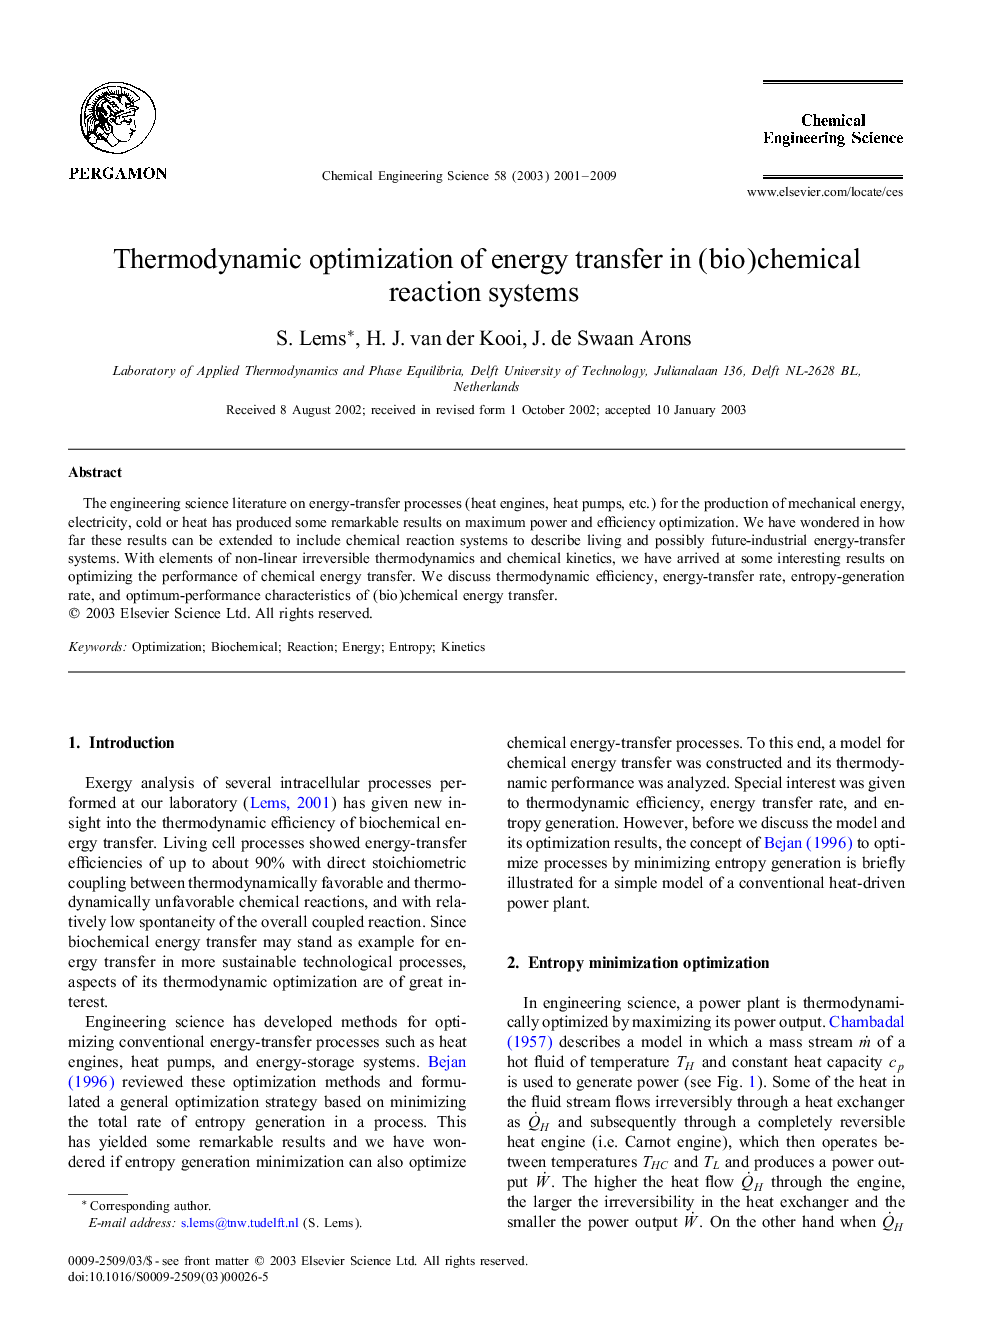 Thermodynamic optimization of energy transfer in (bio)chemical reaction systems